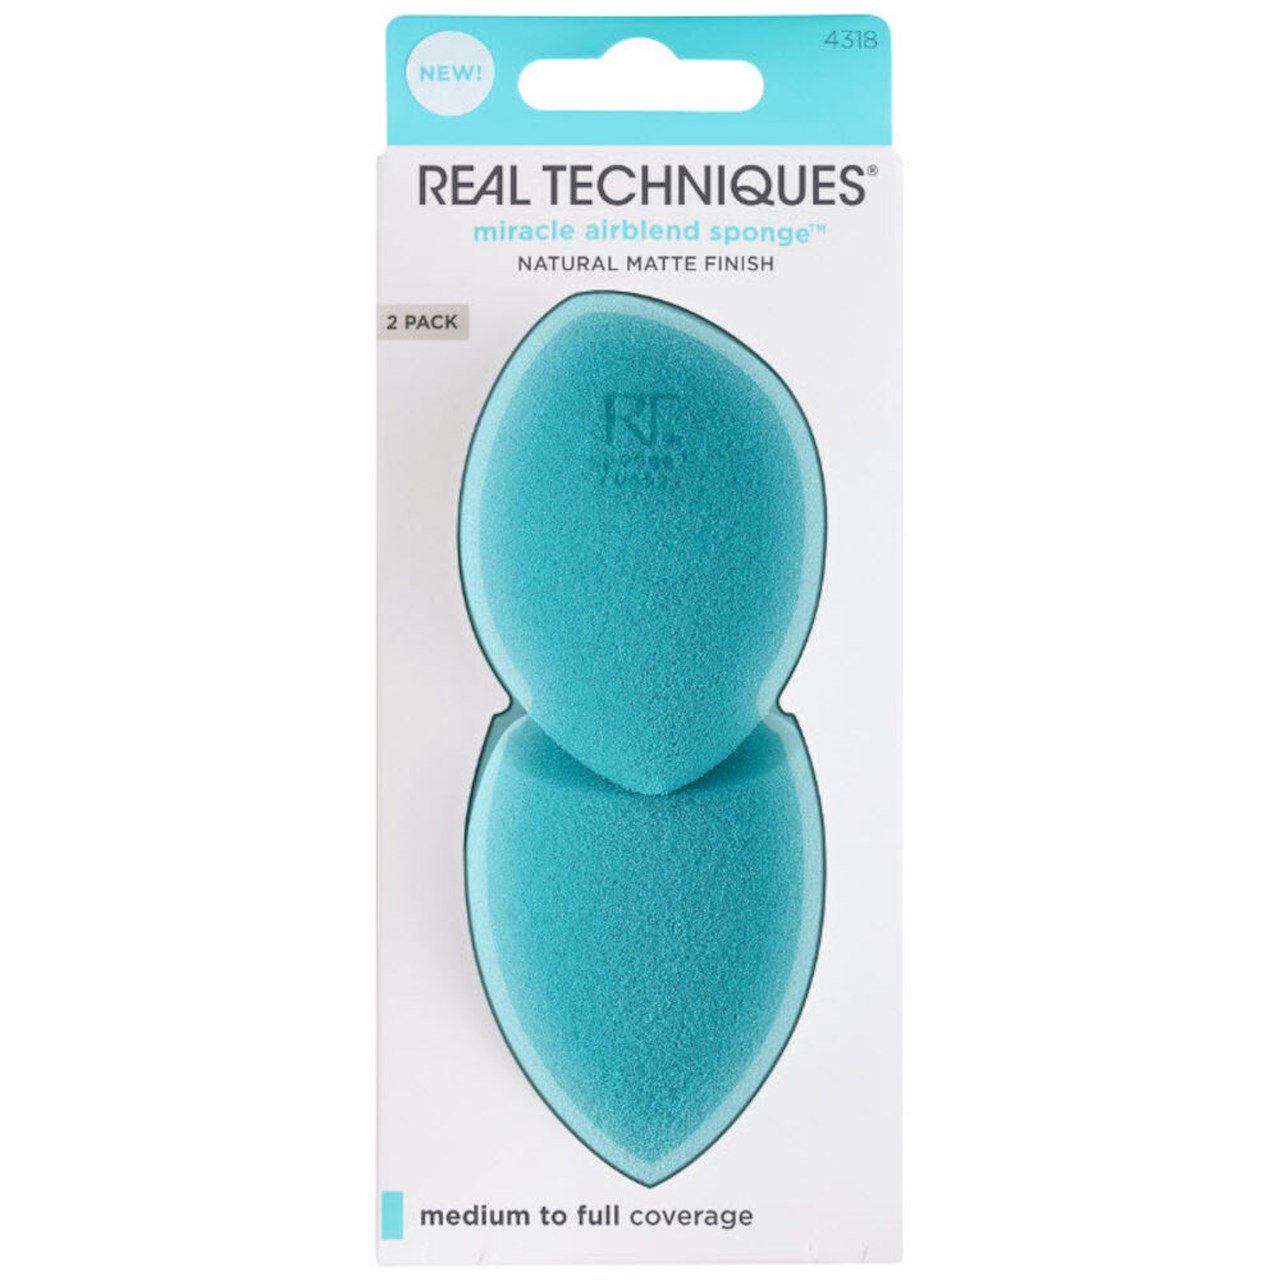 REAL TECHNIQUES Miracle Airblend Sponge 2 st